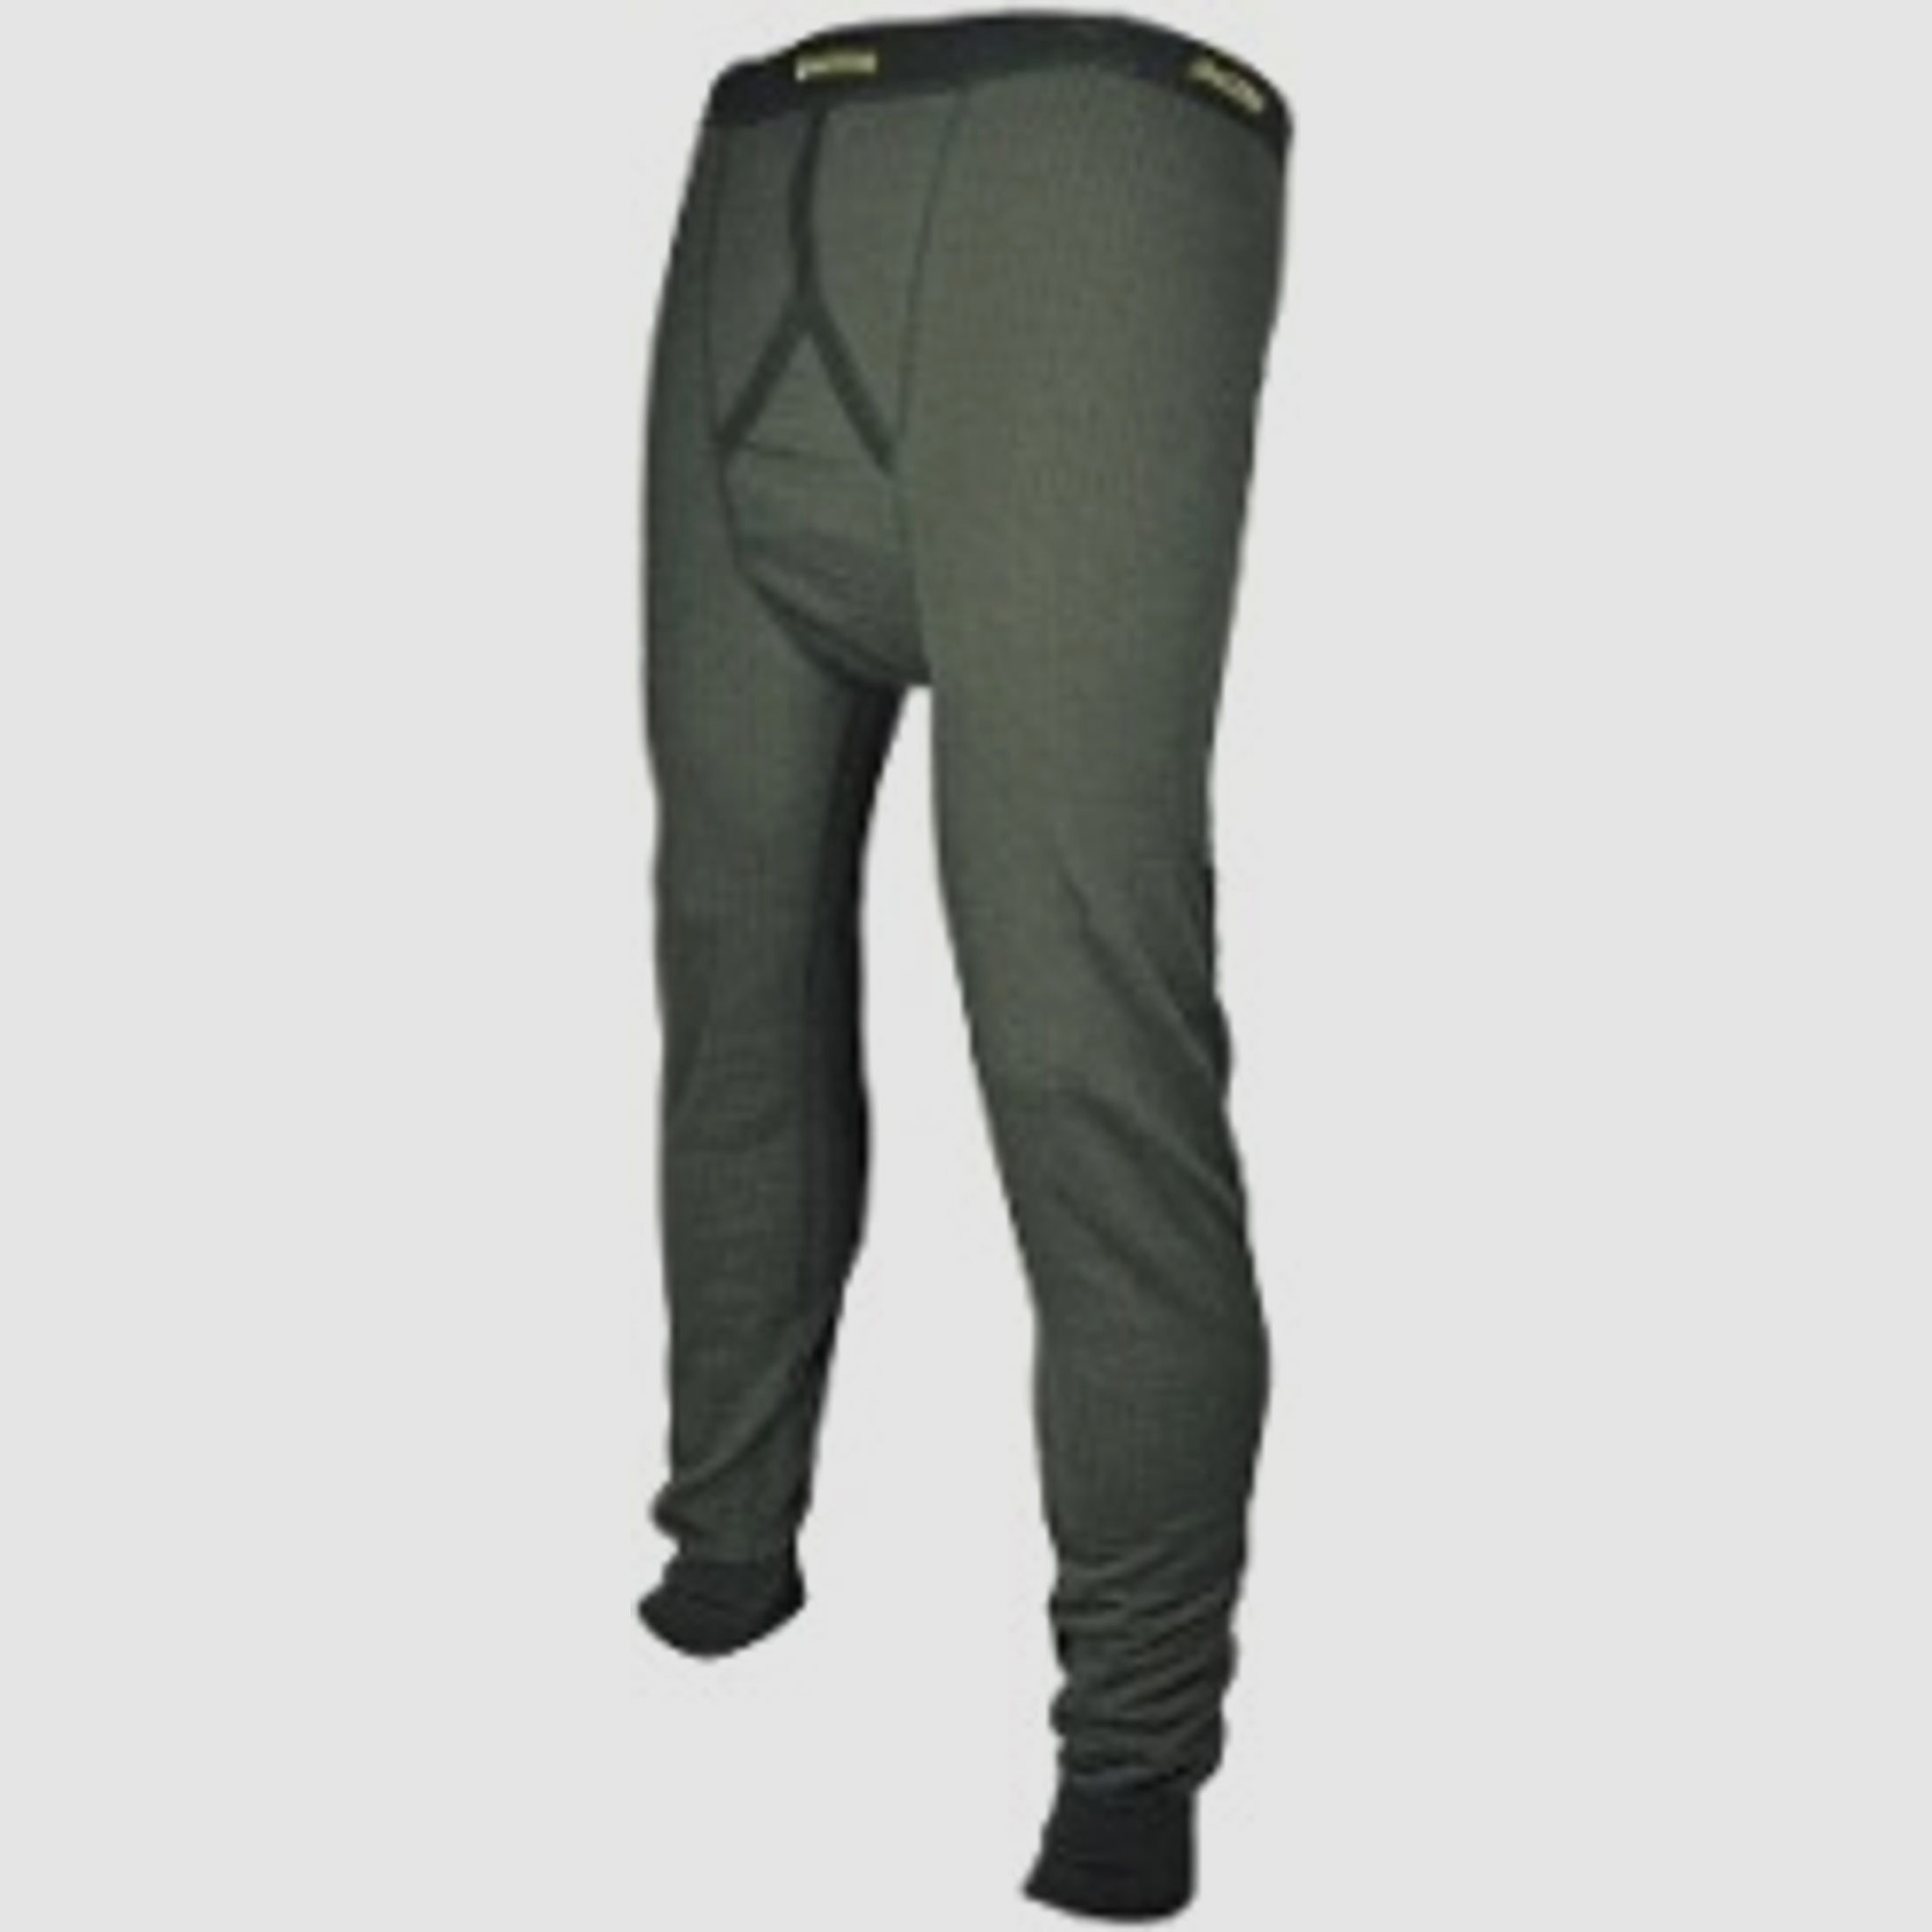 TS400 Herrenhose lang - Thermo Funktion